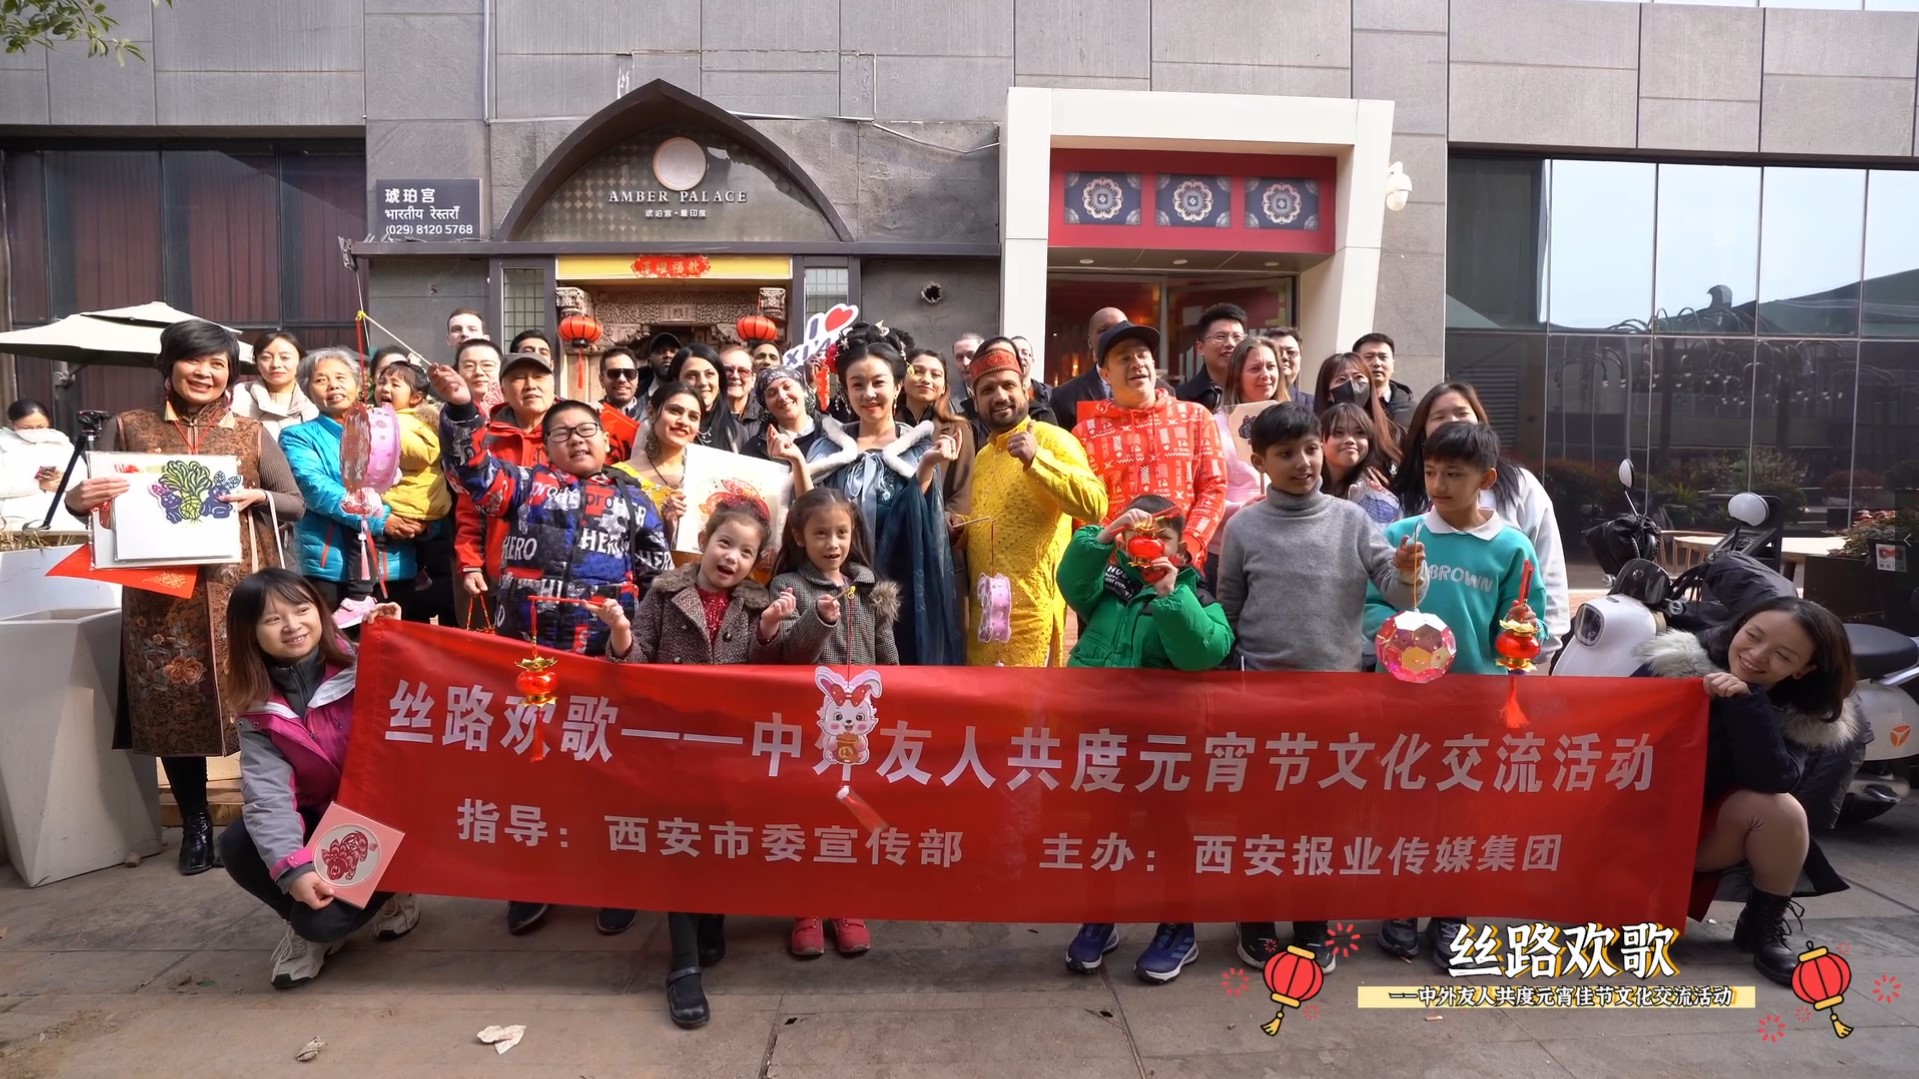 More than 50 Chinese and foreign friends from 20 countries gathered together to sing the Silk Road So